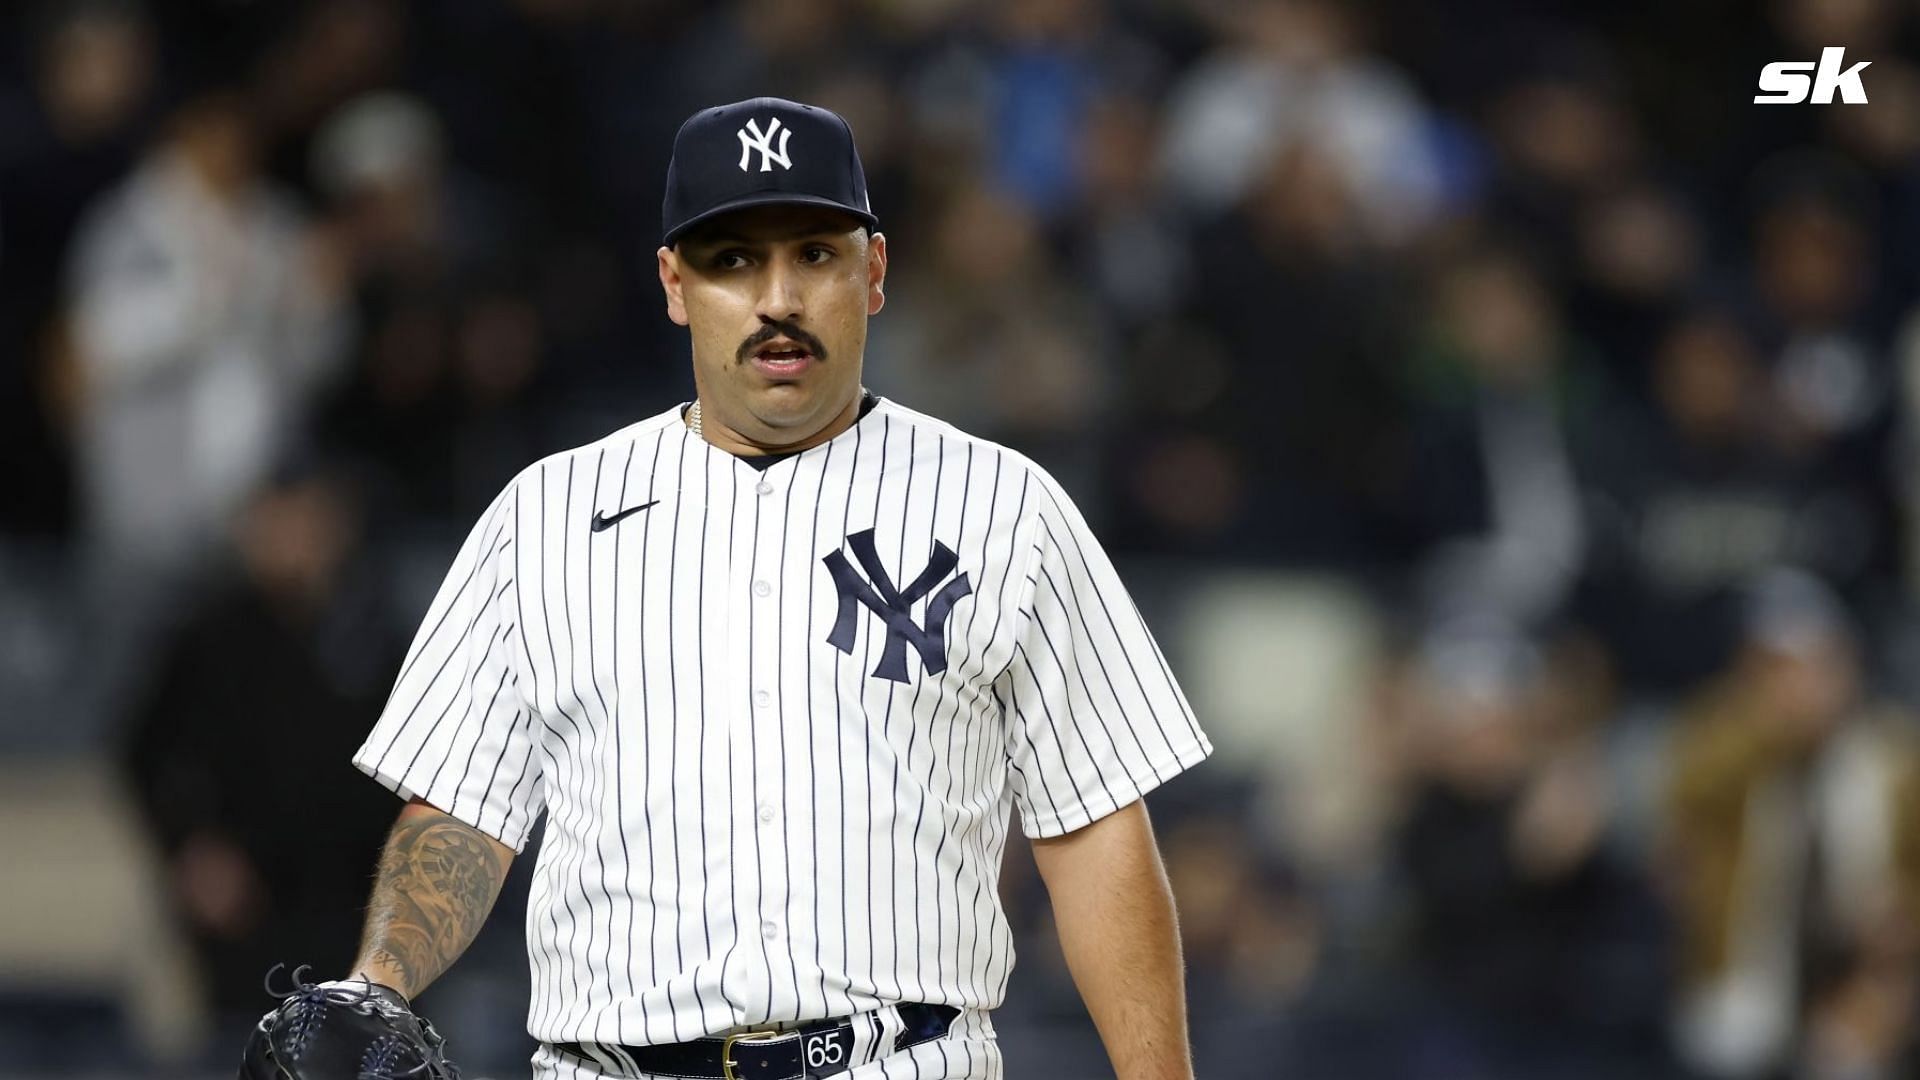 Yankees fans surveyed on Nestor Cortes' replacement and Frankie